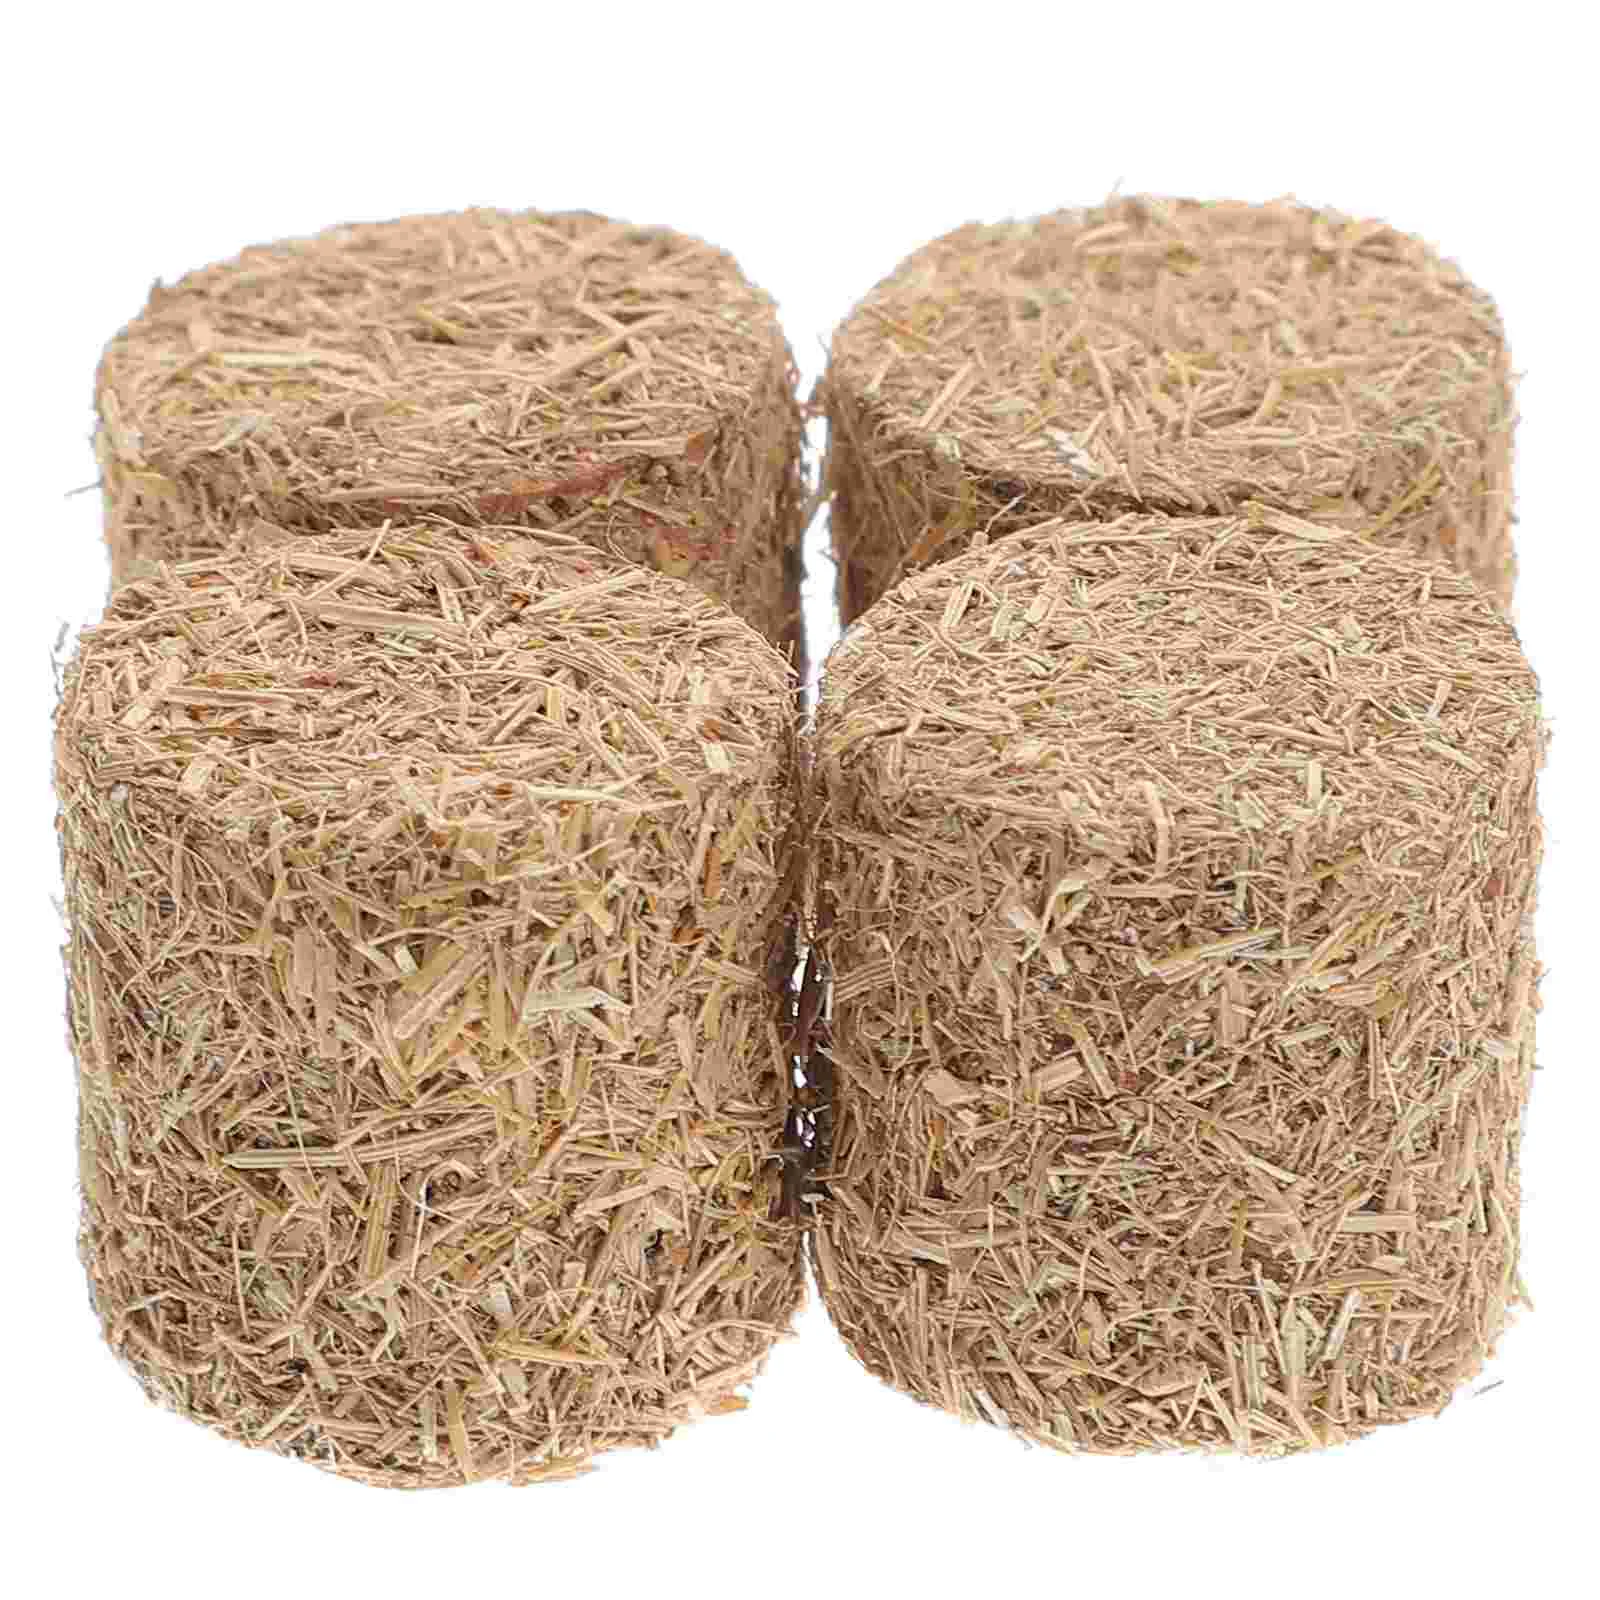 

4 Pcs Mini Haystack Halloween Table Top Decorations Bales Model Around The Office Yard Wood Scene Adornment Straw